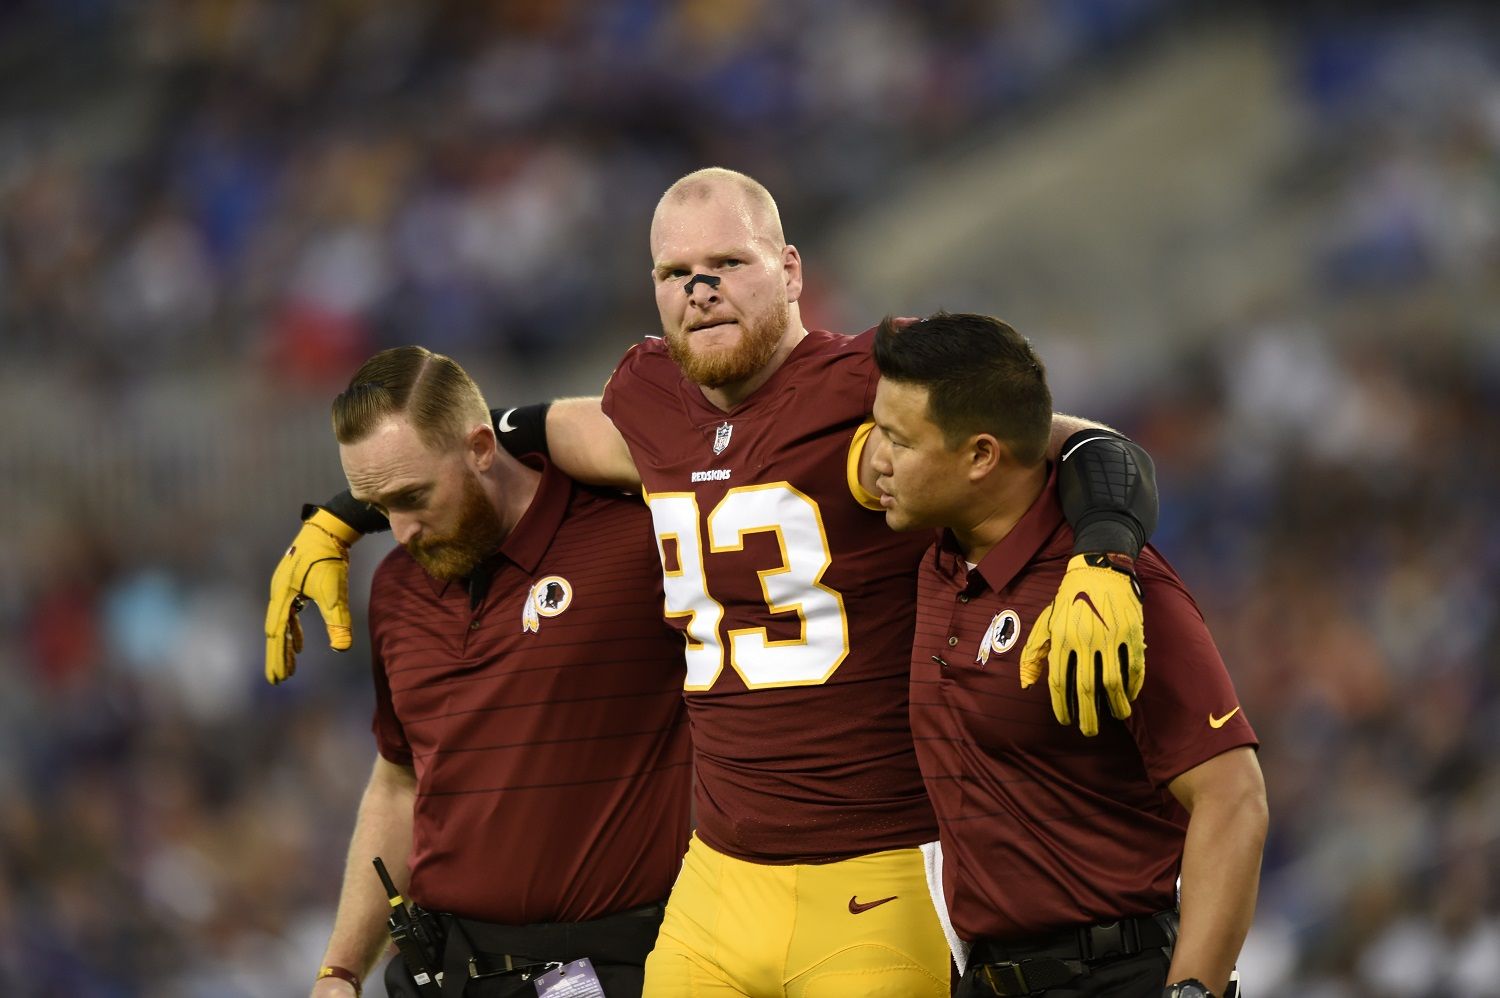 Washington Redskins linebacker Trent Murphy (93) is assisted off the field in the first half of a preseason NFL football game against the Baltimore Ravens, Thursday, Aug. 10, 2017, in Baltimore. (AP Photo/Gail Burton)